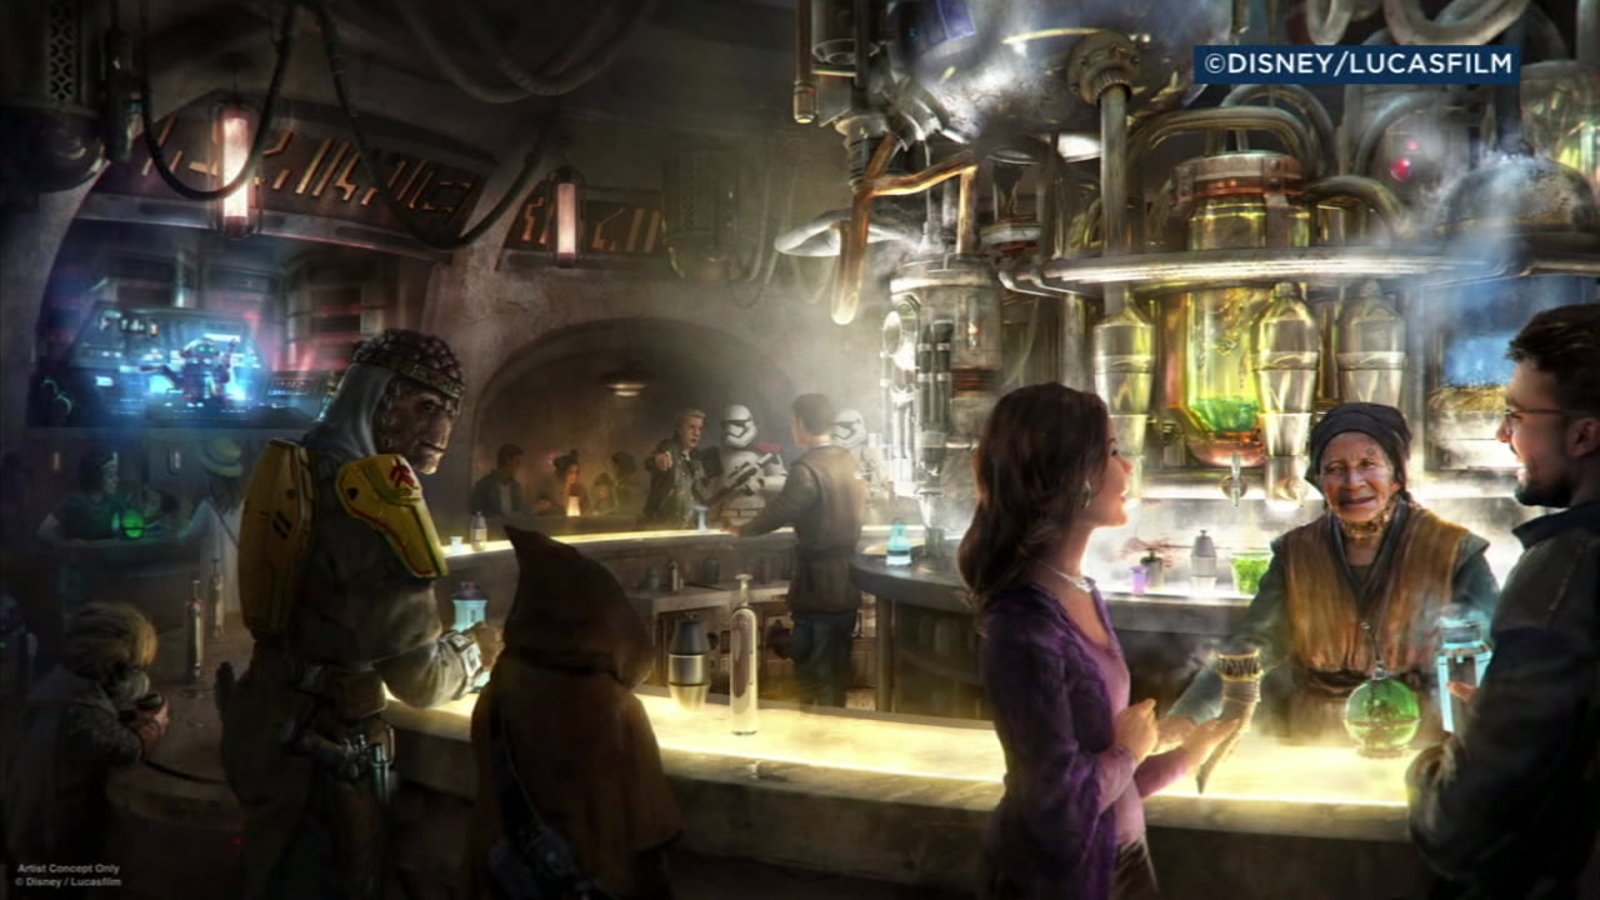 Disney reveals details of Oga's Cantina at Star Wars: Galaxy's Edge Los Angeles